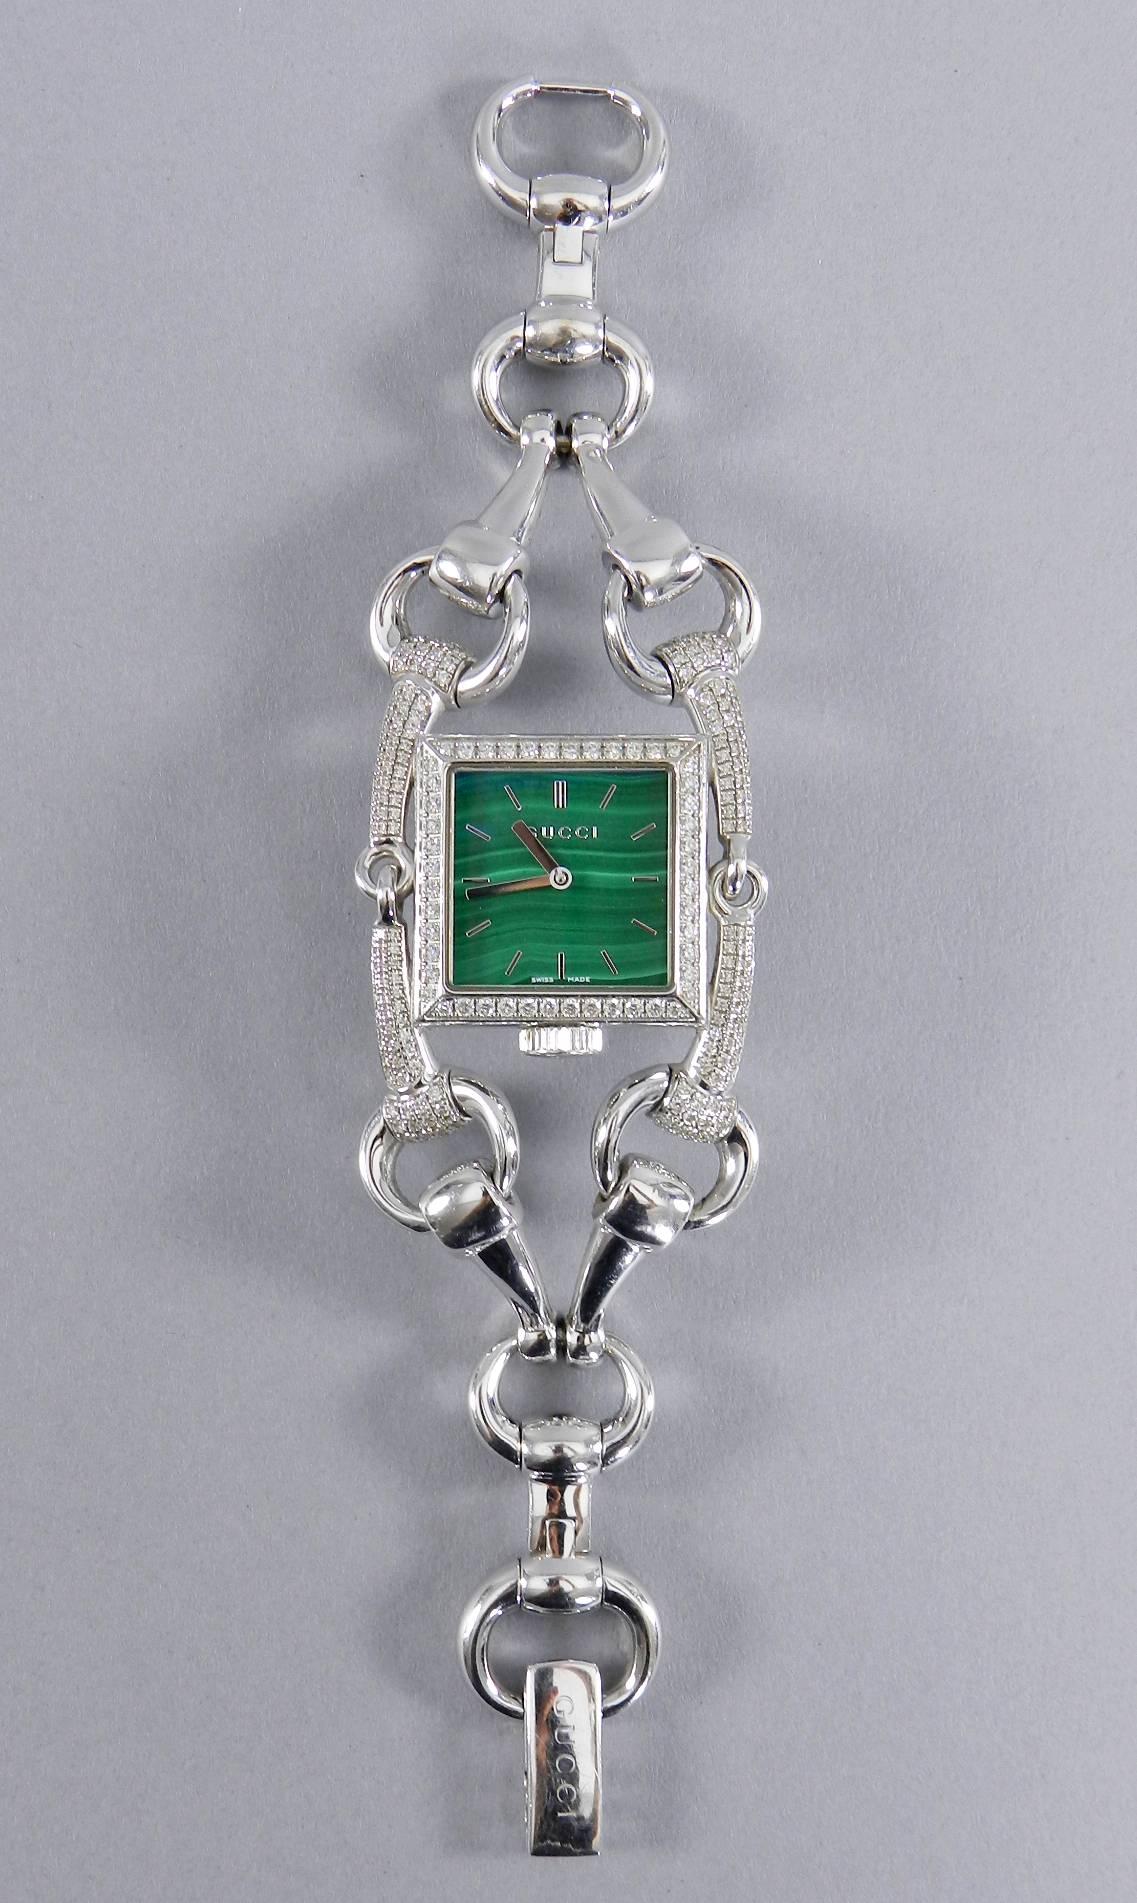 Gucci 18k white gold and diamond Signoria watch with green malachite face. Luxury watch comes with extra links and insurance appraisal. Model number YA116306. Set with 232 diamonds weighing approximately 4.64 carats. Clarity VVS, Color F-G-H. 